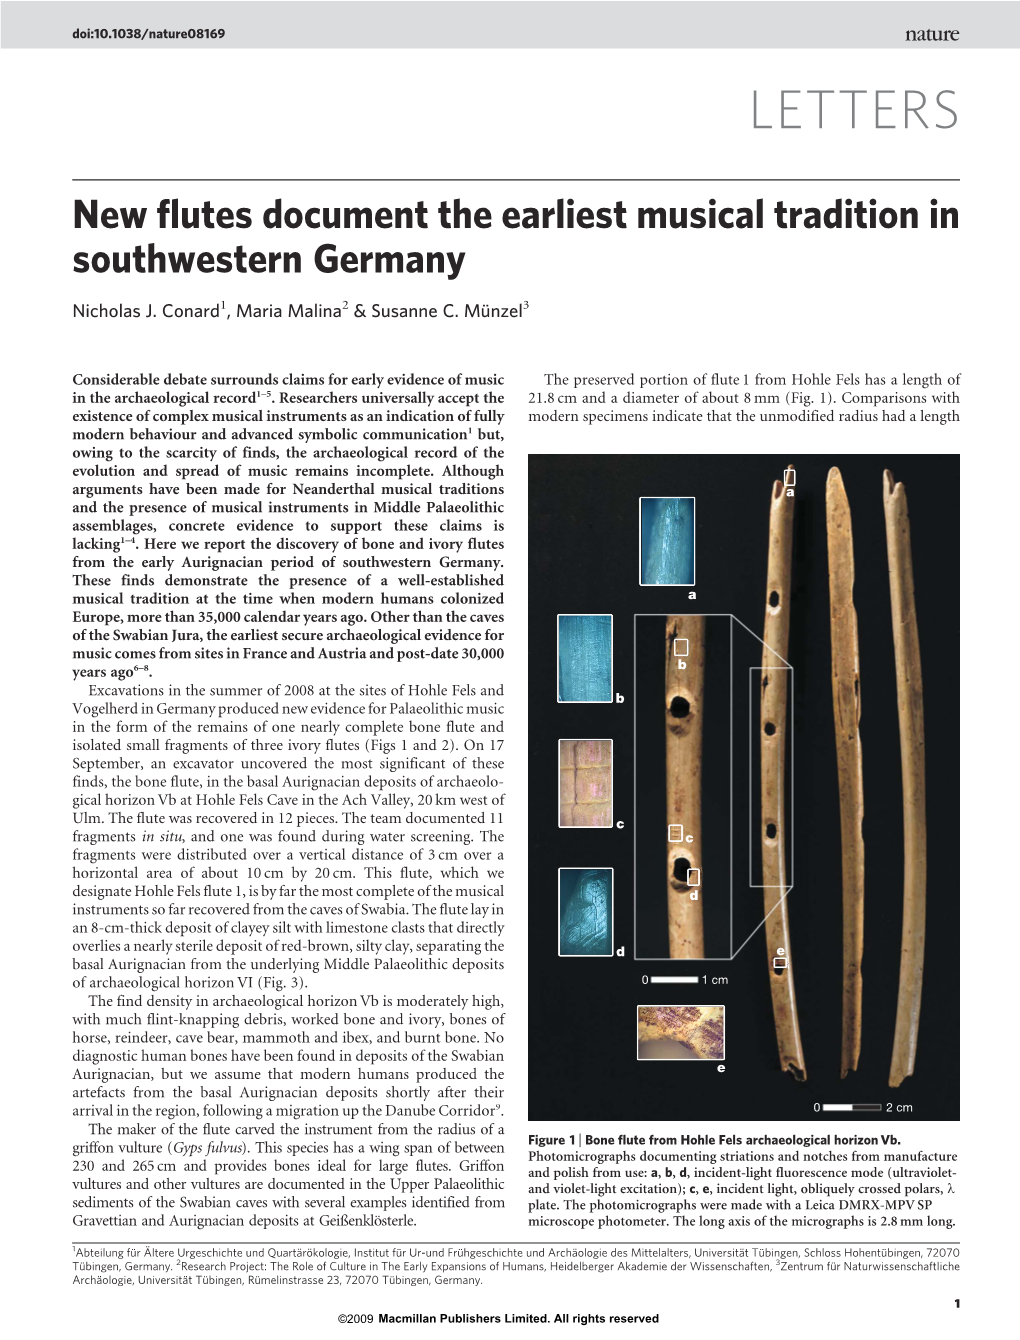 New Flutes Document the Earliest Musical Tradition in Southwestern Germany